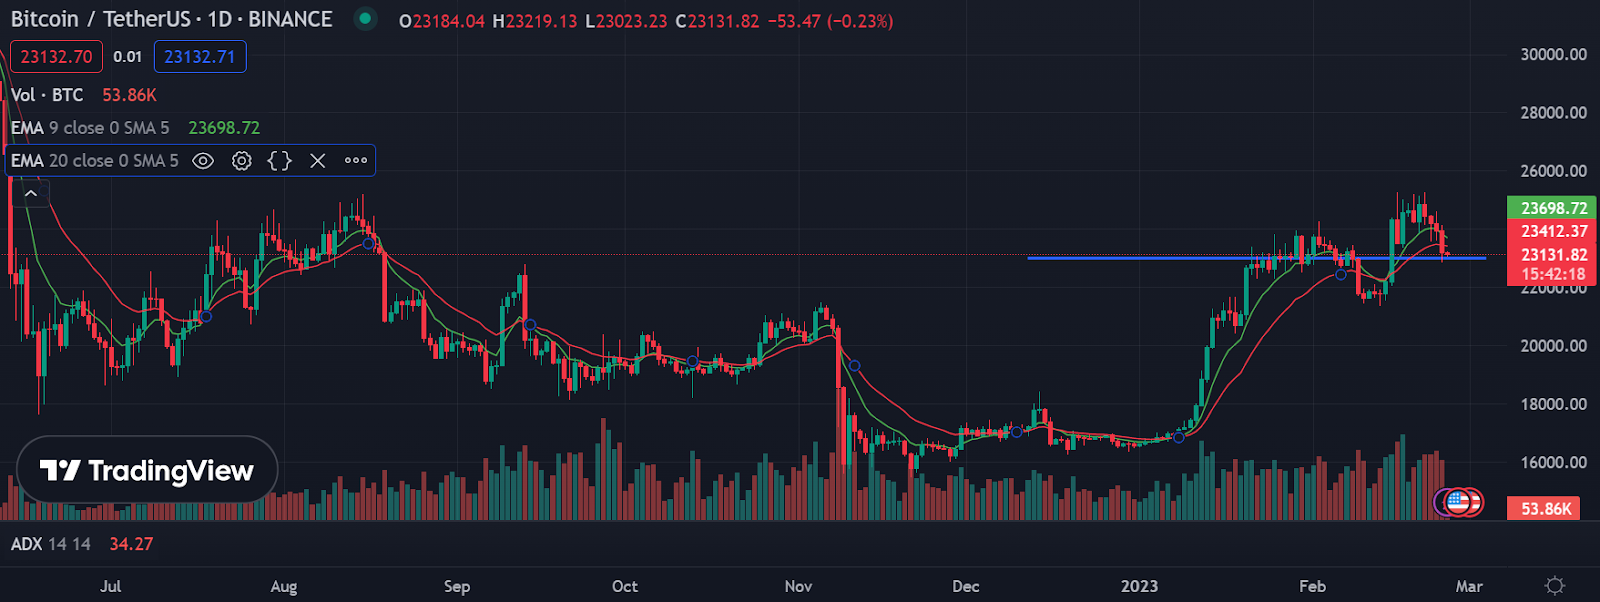 Bitcoin / Tether US 1D (Source: TradingView)